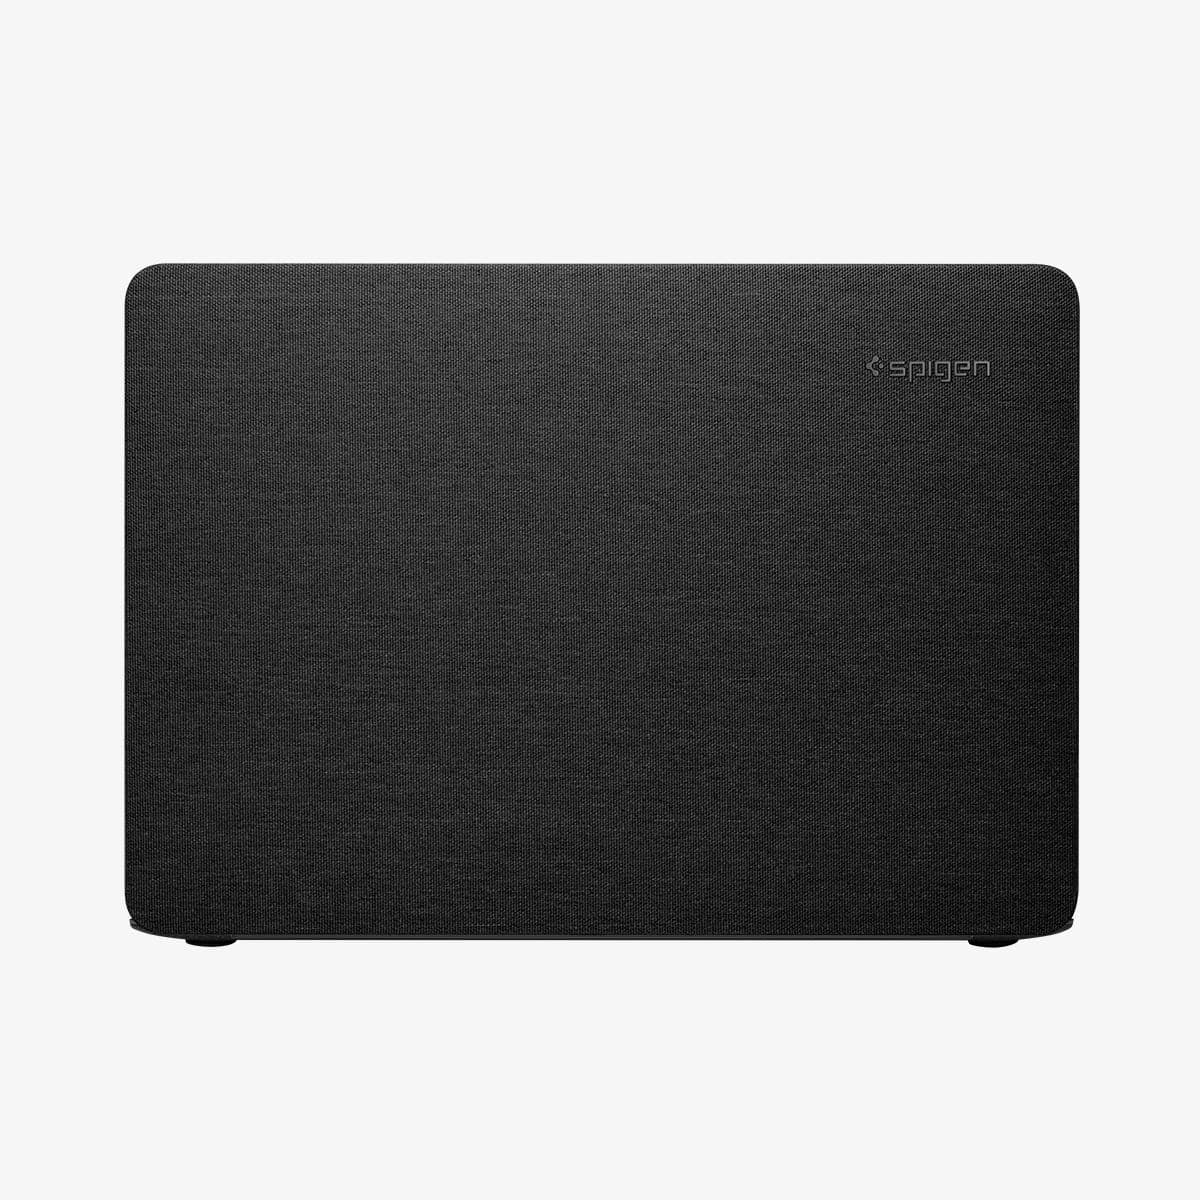 070CS25965 - MacBook Pro 13-inch Case Thin Fit in Black showing the top